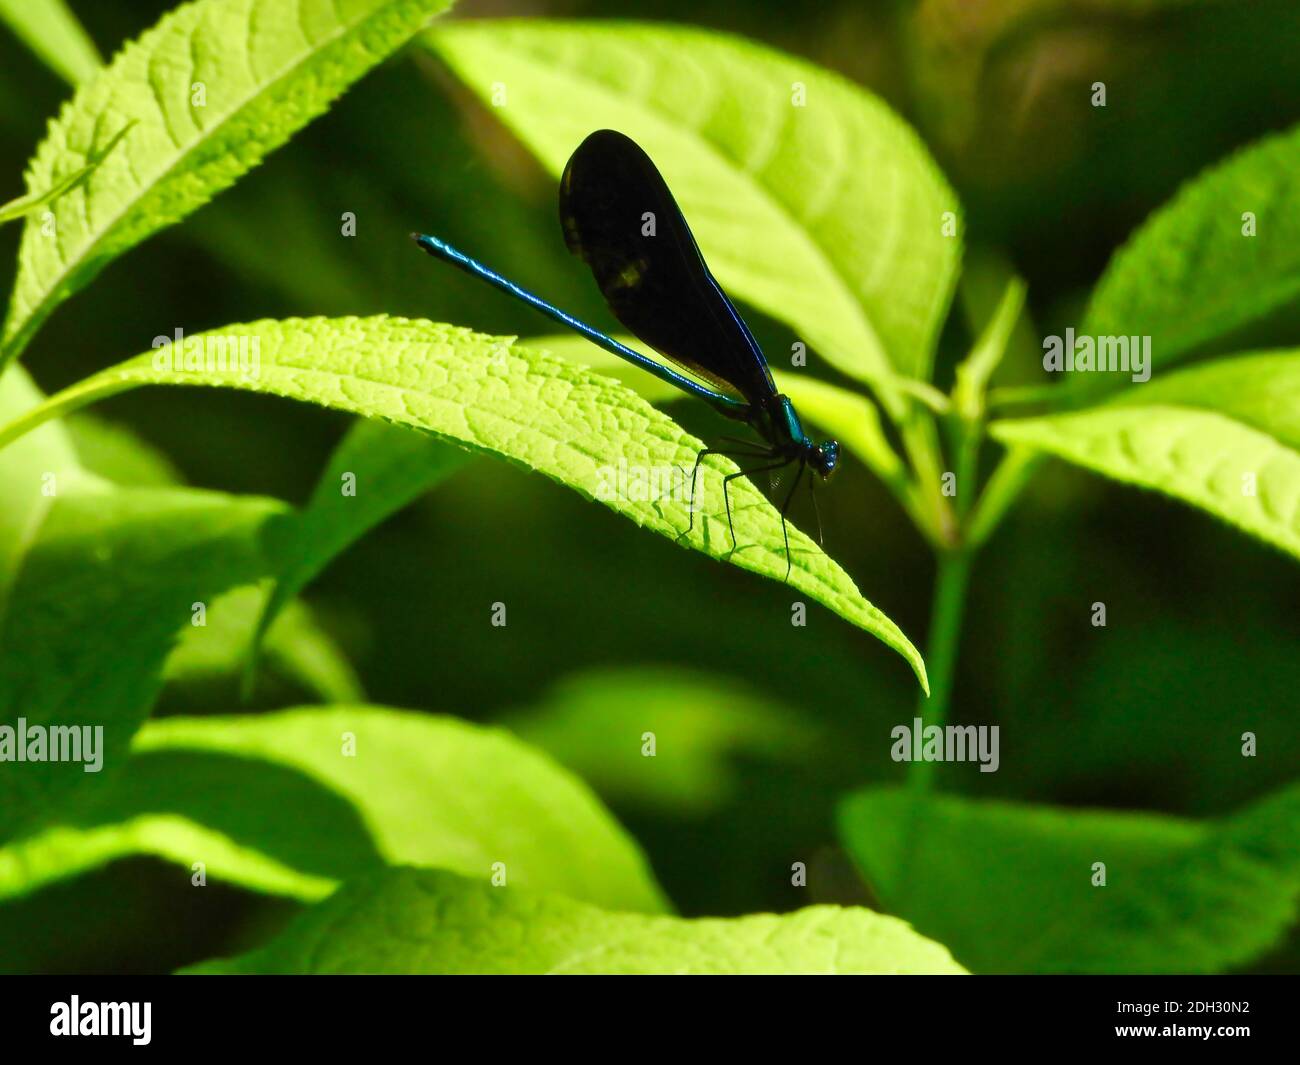 Ebony Jewelwing Dragonfly with Detail Sits on Green Leaf with Slight Shadow on Leaf from Legs Surrounded by Green Leaves on Bright Summer Sunny Day Stock Photo